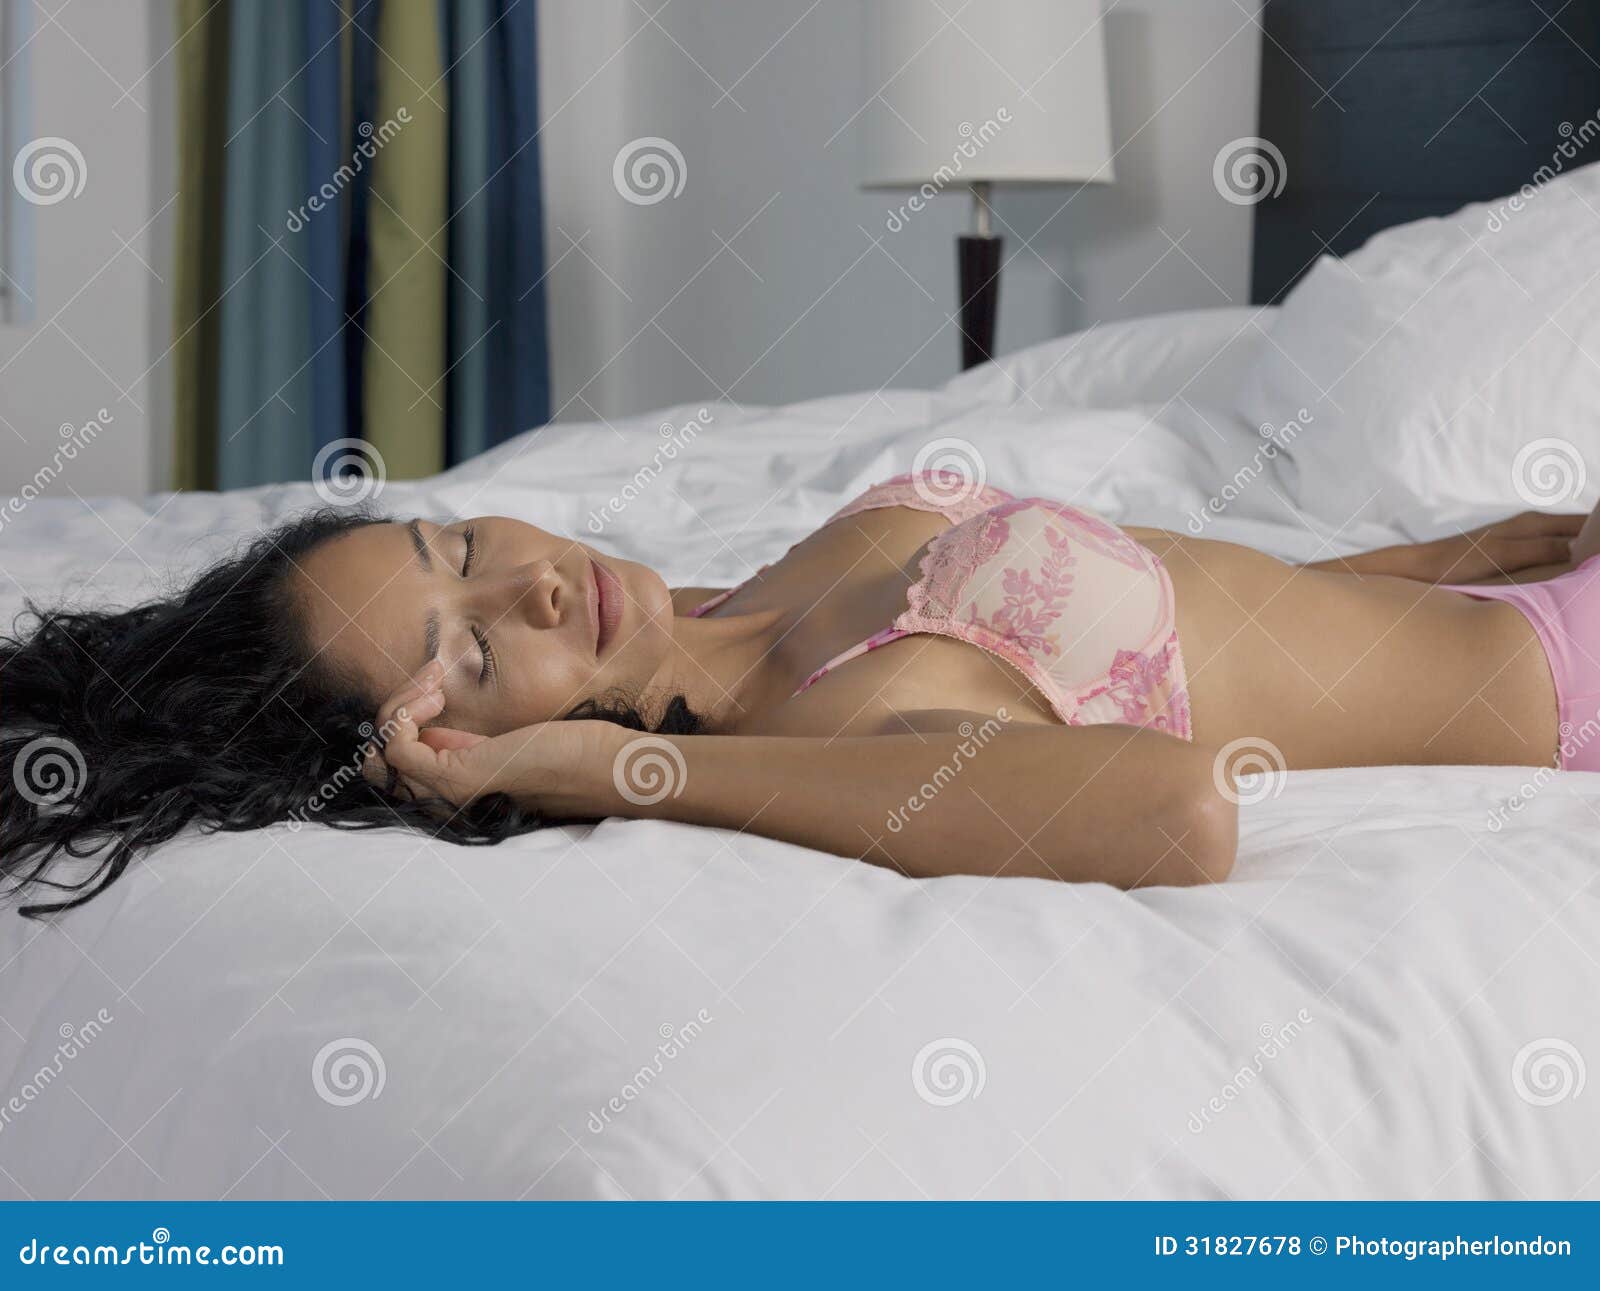 Woman in lingerie sleeping on the bed Stock Photo